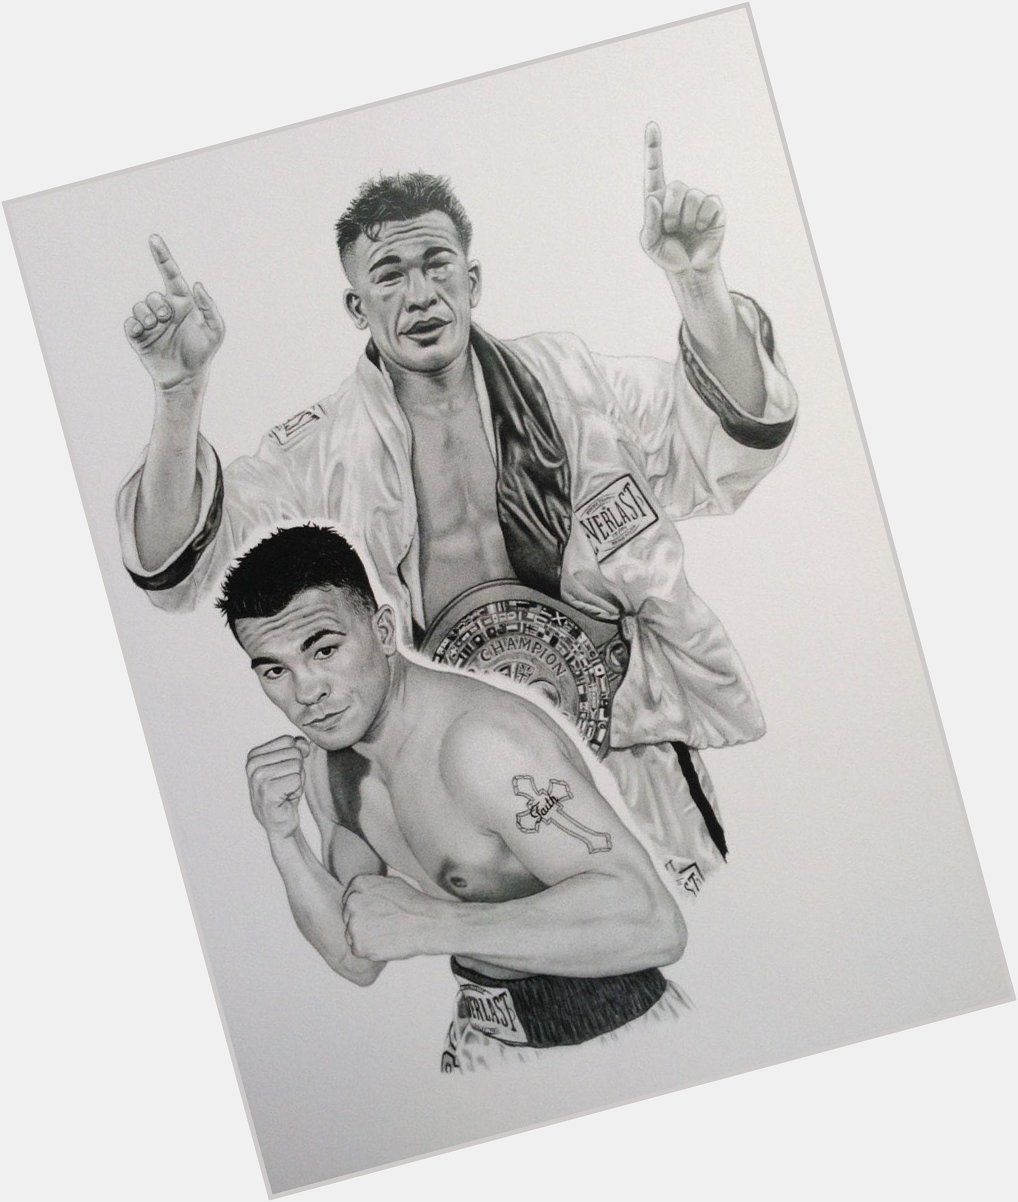 Arturo Gatti would have been 45 today! One of my favourite fighters, Happy Birthday Champ      